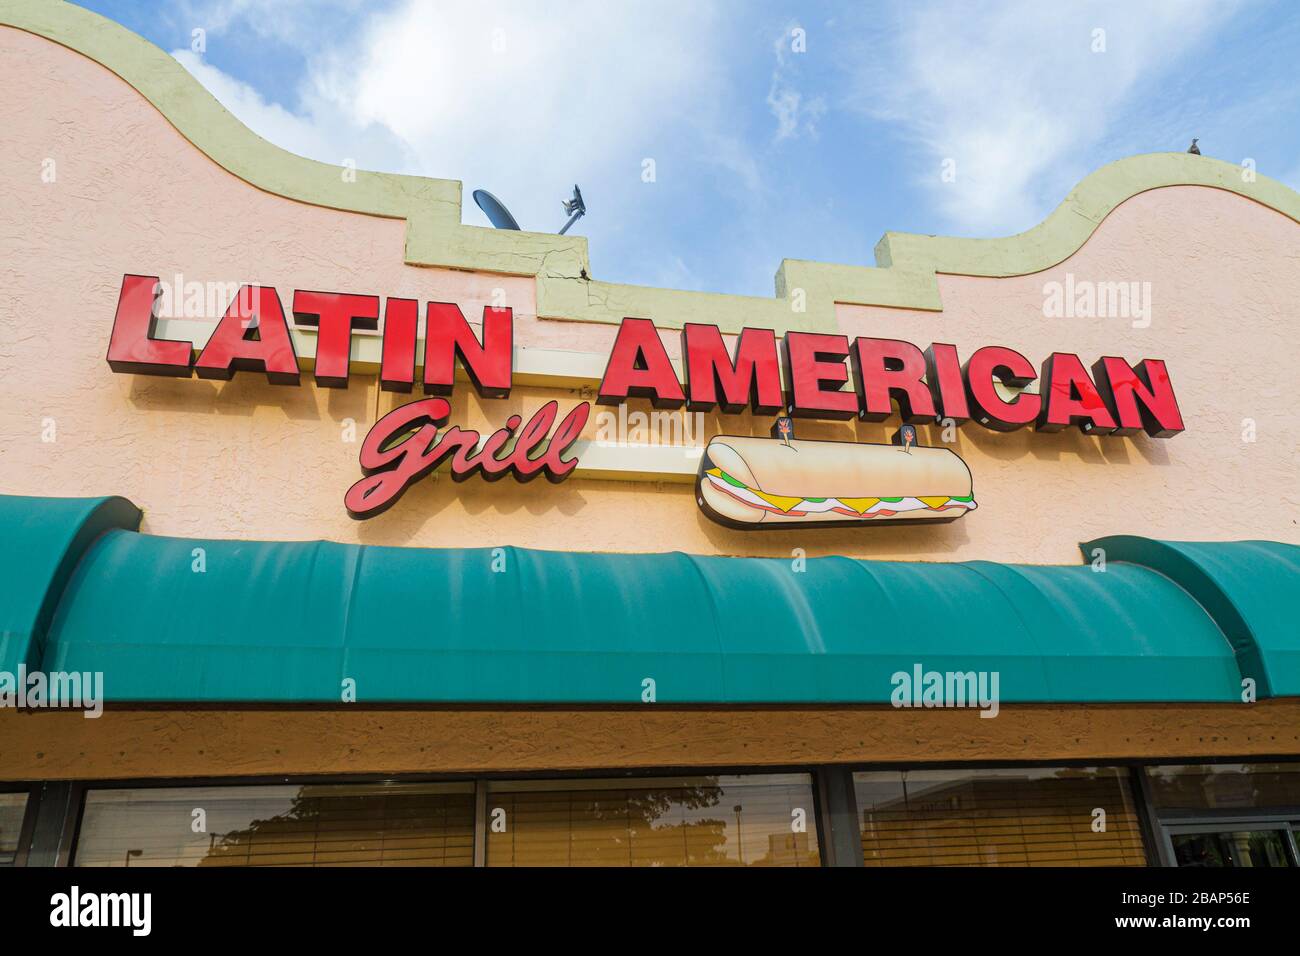 Miami Florida,Doral,Latin American Grill,restaurant restaurants food dining  cafe cafes,sign,outside exterior,front,entrance,FL110704013 Stock Photo -  Alamy